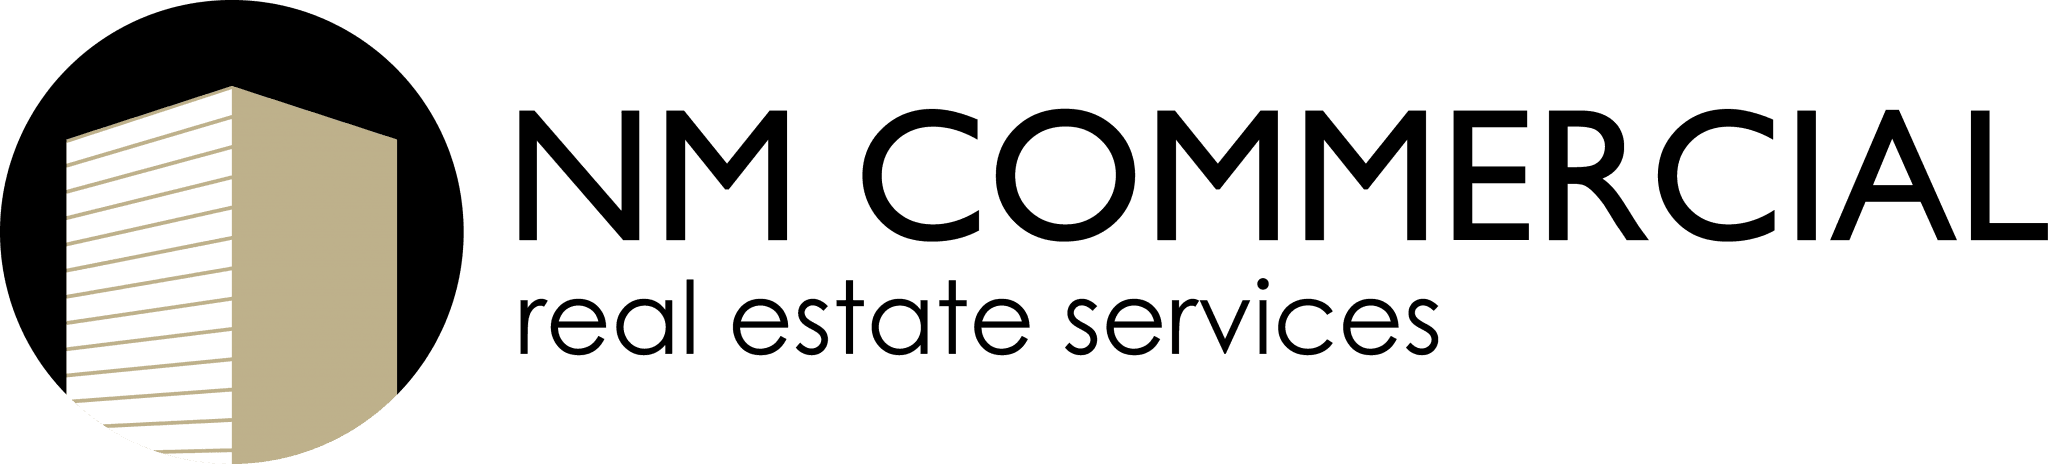 NM Commercial Real Estate Services logo